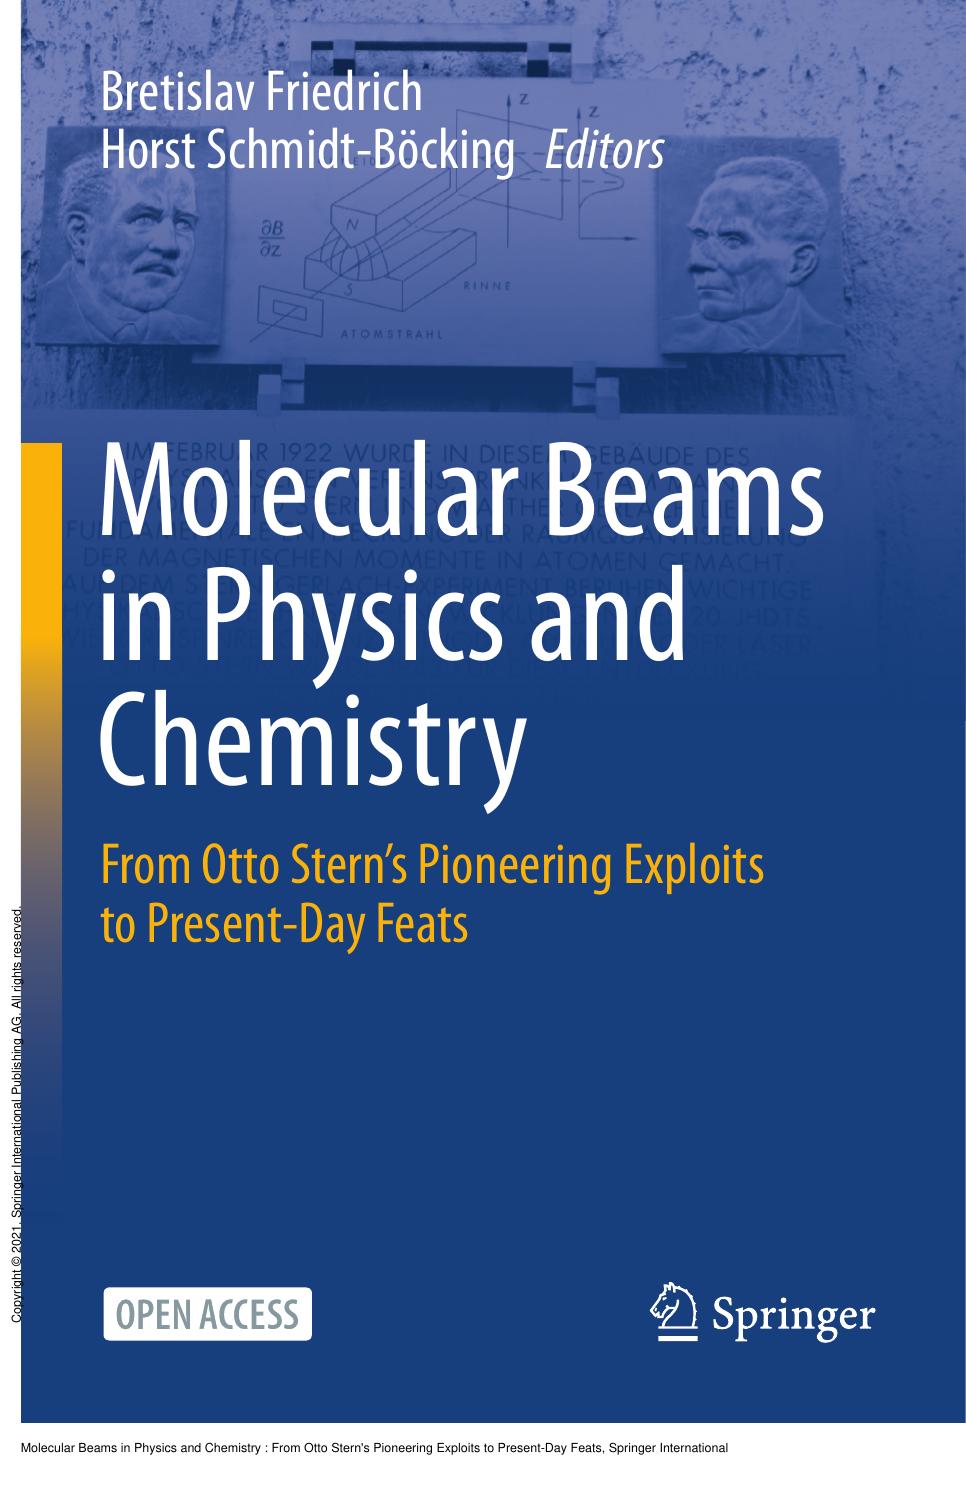 Molecular Beams in Physics and Chemistry: From Otto Stern's Pioneering Exploits to Present-Day Feats by Bretislav Friedrich; Horst Schmidt-Böcking